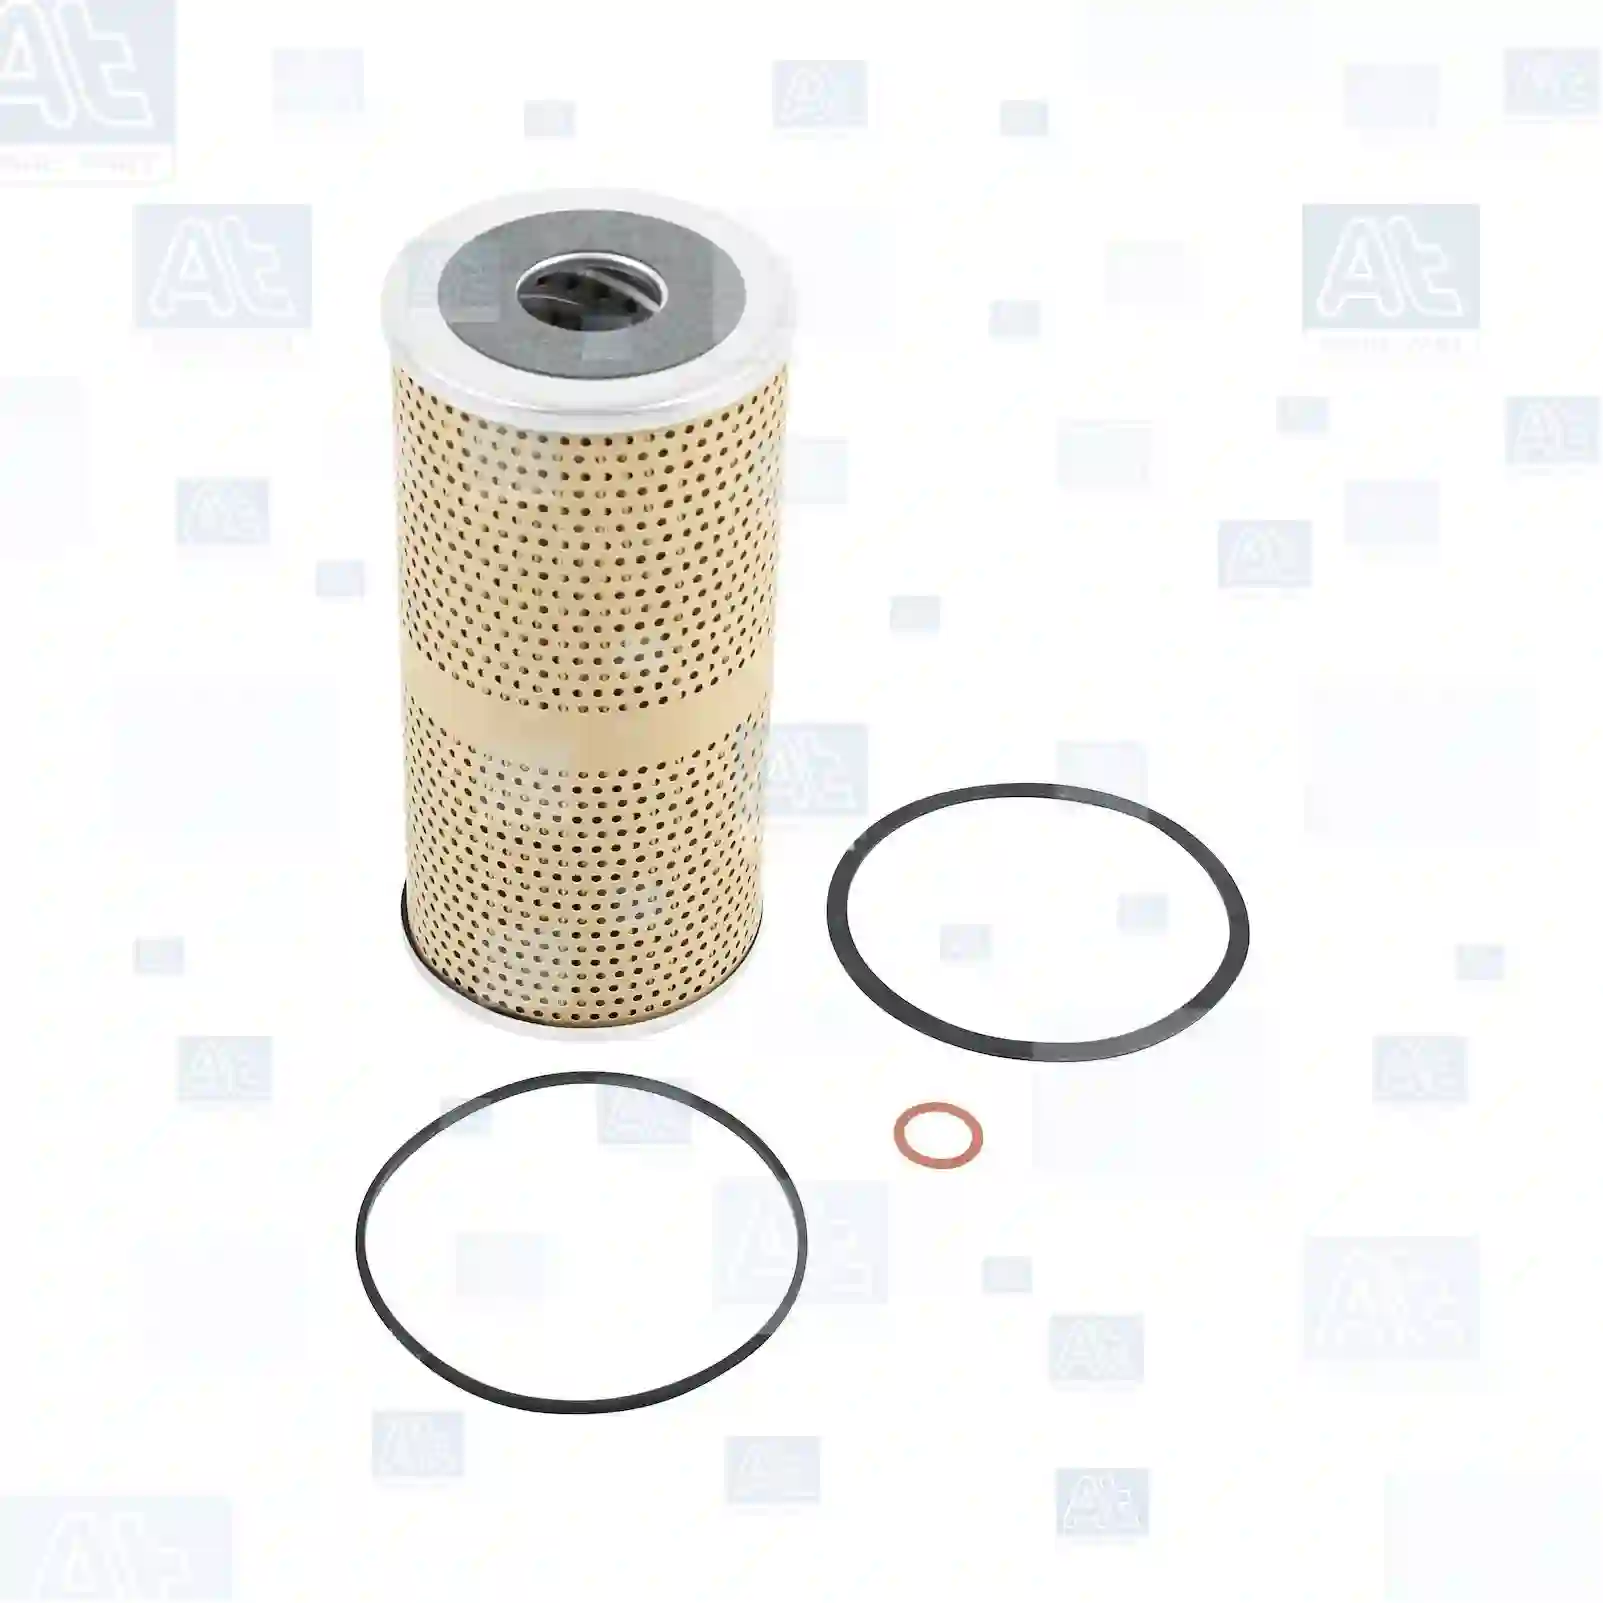 Oil filter, 77700064, 00597926, 00793528, 00817332, 00908285, 01856915, 01880566, 04310216, 043710219, 059792, 079352, 079362, 081733, 090828, 185691, 1856915, 188056, 197121, 221041, 3022104, 30221041, 3104894, 31048945, 431021, 4335348, 43353488, 4369988, 43699880, 4371021, 43710219, 4395889, 665859, 6658595, 70197121, 73022104, 73104894, 74335348, 74371021, 74395889, 5573014, 5573014, 131470H1, 131570H1, 302565R91, 302574R91, 303122R91, 304753C91, 3068931R91, 3071235R91, 319826R91, 319926R91, 333719R91, 340175R91, 35034, 35054, 612724C91, 613797C91, 613798C91, 877380C91, L031230, L31230, L31231, L33711, R14458, 3I-1149, 3I-1224, 9Y-4456, 9Y-4515, 2647666, 128903, 131570, 142879, 142897, 215502, 3301060, 3301061, 988618, 98861800, 5573014, 4194770, 4788715, 7390983, 7391047, 00022104, 00079325, 00079352, 00081733, 00090828, 00185691, 00188056, 00197121, 00431021, 00665859, 00761970, 01366330, 01831101, 01836103, 01856915, 01880566, 01901934, 03022104, 04335348, 04369988, 04371021, 04371137, 04395889, 04528873, 04538573, 04587711, 04590074, 04596890, 04596891, 04636295, 04636401, 04777257, 04777258, 04887711, 07722336, 08813556, 45938901, 552442365, 556019309, 701856915, 701880566, 70022104, 70059792, 70079325, 70079352, 70081733, 70090828, 70197121, 70431021, 73022104, 73104894, 74335348, 74347021, 74371021, 74371137, 74395889, 74538573, 74587711, 74590074, 74596890, 74596891, 74636401, 74887711, 78813556, 79010563, 79032093, Y02274510, YO2274510, 5000872, 5011472, DNP550132, 5572600, 5573012, 5573013, 5573014, 5573102, 5574971, 5575134, 5575176, 5575208, 5575995, 5576067, 5576200, 5577106, 5577124, 5578014, 6427275, 6436145, 6437275, 6438590, 9020329, 9029329, 9307817, 5572600, 5573012, 5573013, 5573014, 5573102, 5574971, 5575134, 5575176, 5575208, 5575995, 5576067, 5576200, 5577106, 5577124, 5578014, 6427275, 6436145, 6437275, 6438590, 6439400, 7984308, 7437000038, 9437100063, 9437100139, 01901608, 01901934, 04596890, 04636401, 08813556, 1901934, 73104894, 74590074, 78813556, 32/300518, AR29554R, AR30643R, AR36043R, AT34760, E035481, E35481, 4371021, 5573014, 5574486, KW509, KW509LUB, 5000931, P21366, 20010, 236GB240, 236GB240LUB, 1087415, 1087415M91, 1755206, 835514, 969062, PB509N, PB509NLUB, 1050545, 150545, W1050545, 0003139010, 0003180836, 0003620612, HD4124, LU698, 3F12181, 5573014, 5576711, 5677124, 267518, 3130910, 40141558, 4095654, 62129697, 66175068, 6617509, 6631812, 79211272, 892972 ||  77700064 At Spare Part | Engine, Accelerator Pedal, Camshaft, Connecting Rod, Crankcase, Crankshaft, Cylinder Head, Engine Suspension Mountings, Exhaust Manifold, Exhaust Gas Recirculation, Filter Kits, Flywheel Housing, General Overhaul Kits, Engine, Intake Manifold, Oil Cleaner, Oil Cooler, Oil Filter, Oil Pump, Oil Sump, Piston & Liner, Sensor & Switch, Timing Case, Turbocharger, Cooling System, Belt Tensioner, Coolant Filter, Coolant Pipe, Corrosion Prevention Agent, Drive, Expansion Tank, Fan, Intercooler, Monitors & Gauges, Radiator, Thermostat, V-Belt / Timing belt, Water Pump, Fuel System, Electronical Injector Unit, Feed Pump, Fuel Filter, cpl., Fuel Gauge Sender,  Fuel Line, Fuel Pump, Fuel Tank, Injection Line Kit, Injection Pump, Exhaust System, Clutch & Pedal, Gearbox, Propeller Shaft, Axles, Brake System, Hubs & Wheels, Suspension, Leaf Spring, Universal Parts / Accessories, Steering, Electrical System, Cabin Oil filter, 77700064, 00597926, 00793528, 00817332, 00908285, 01856915, 01880566, 04310216, 043710219, 059792, 079352, 079362, 081733, 090828, 185691, 1856915, 188056, 197121, 221041, 3022104, 30221041, 3104894, 31048945, 431021, 4335348, 43353488, 4369988, 43699880, 4371021, 43710219, 4395889, 665859, 6658595, 70197121, 73022104, 73104894, 74335348, 74371021, 74395889, 5573014, 5573014, 131470H1, 131570H1, 302565R91, 302574R91, 303122R91, 304753C91, 3068931R91, 3071235R91, 319826R91, 319926R91, 333719R91, 340175R91, 35034, 35054, 612724C91, 613797C91, 613798C91, 877380C91, L031230, L31230, L31231, L33711, R14458, 3I-1149, 3I-1224, 9Y-4456, 9Y-4515, 2647666, 128903, 131570, 142879, 142897, 215502, 3301060, 3301061, 988618, 98861800, 5573014, 4194770, 4788715, 7390983, 7391047, 00022104, 00079325, 00079352, 00081733, 00090828, 00185691, 00188056, 00197121, 00431021, 00665859, 00761970, 01366330, 01831101, 01836103, 01856915, 01880566, 01901934, 03022104, 04335348, 04369988, 04371021, 04371137, 04395889, 04528873, 04538573, 04587711, 04590074, 04596890, 04596891, 04636295, 04636401, 04777257, 04777258, 04887711, 07722336, 08813556, 45938901, 552442365, 556019309, 701856915, 701880566, 70022104, 70059792, 70079325, 70079352, 70081733, 70090828, 70197121, 70431021, 73022104, 73104894, 74335348, 74347021, 74371021, 74371137, 74395889, 74538573, 74587711, 74590074, 74596890, 74596891, 74636401, 74887711, 78813556, 79010563, 79032093, Y02274510, YO2274510, 5000872, 5011472, DNP550132, 5572600, 5573012, 5573013, 5573014, 5573102, 5574971, 5575134, 5575176, 5575208, 5575995, 5576067, 5576200, 5577106, 5577124, 5578014, 6427275, 6436145, 6437275, 6438590, 9020329, 9029329, 9307817, 5572600, 5573012, 5573013, 5573014, 5573102, 5574971, 5575134, 5575176, 5575208, 5575995, 5576067, 5576200, 5577106, 5577124, 5578014, 6427275, 6436145, 6437275, 6438590, 6439400, 7984308, 7437000038, 9437100063, 9437100139, 01901608, 01901934, 04596890, 04636401, 08813556, 1901934, 73104894, 74590074, 78813556, 32/300518, AR29554R, AR30643R, AR36043R, AT34760, E035481, E35481, 4371021, 5573014, 5574486, KW509, KW509LUB, 5000931, P21366, 20010, 236GB240, 236GB240LUB, 1087415, 1087415M91, 1755206, 835514, 969062, PB509N, PB509NLUB, 1050545, 150545, W1050545, 0003139010, 0003180836, 0003620612, HD4124, LU698, 3F12181, 5573014, 5576711, 5677124, 267518, 3130910, 40141558, 4095654, 62129697, 66175068, 6617509, 6631812, 79211272, 892972 ||  77700064 At Spare Part | Engine, Accelerator Pedal, Camshaft, Connecting Rod, Crankcase, Crankshaft, Cylinder Head, Engine Suspension Mountings, Exhaust Manifold, Exhaust Gas Recirculation, Filter Kits, Flywheel Housing, General Overhaul Kits, Engine, Intake Manifold, Oil Cleaner, Oil Cooler, Oil Filter, Oil Pump, Oil Sump, Piston & Liner, Sensor & Switch, Timing Case, Turbocharger, Cooling System, Belt Tensioner, Coolant Filter, Coolant Pipe, Corrosion Prevention Agent, Drive, Expansion Tank, Fan, Intercooler, Monitors & Gauges, Radiator, Thermostat, V-Belt / Timing belt, Water Pump, Fuel System, Electronical Injector Unit, Feed Pump, Fuel Filter, cpl., Fuel Gauge Sender,  Fuel Line, Fuel Pump, Fuel Tank, Injection Line Kit, Injection Pump, Exhaust System, Clutch & Pedal, Gearbox, Propeller Shaft, Axles, Brake System, Hubs & Wheels, Suspension, Leaf Spring, Universal Parts / Accessories, Steering, Electrical System, Cabin